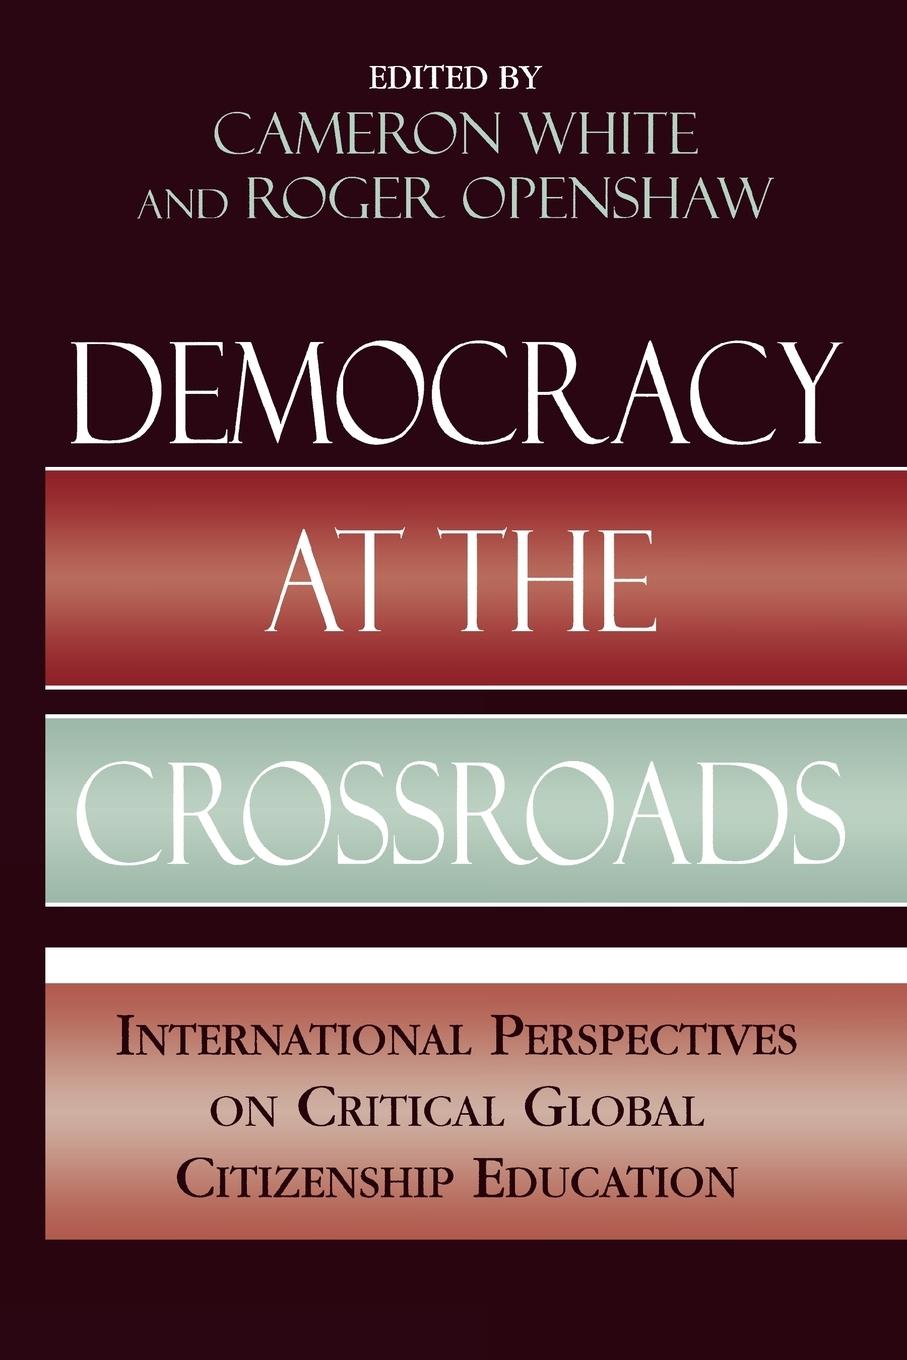 Democracy at the Crossroads - White, Cameron Openshaw, Roger